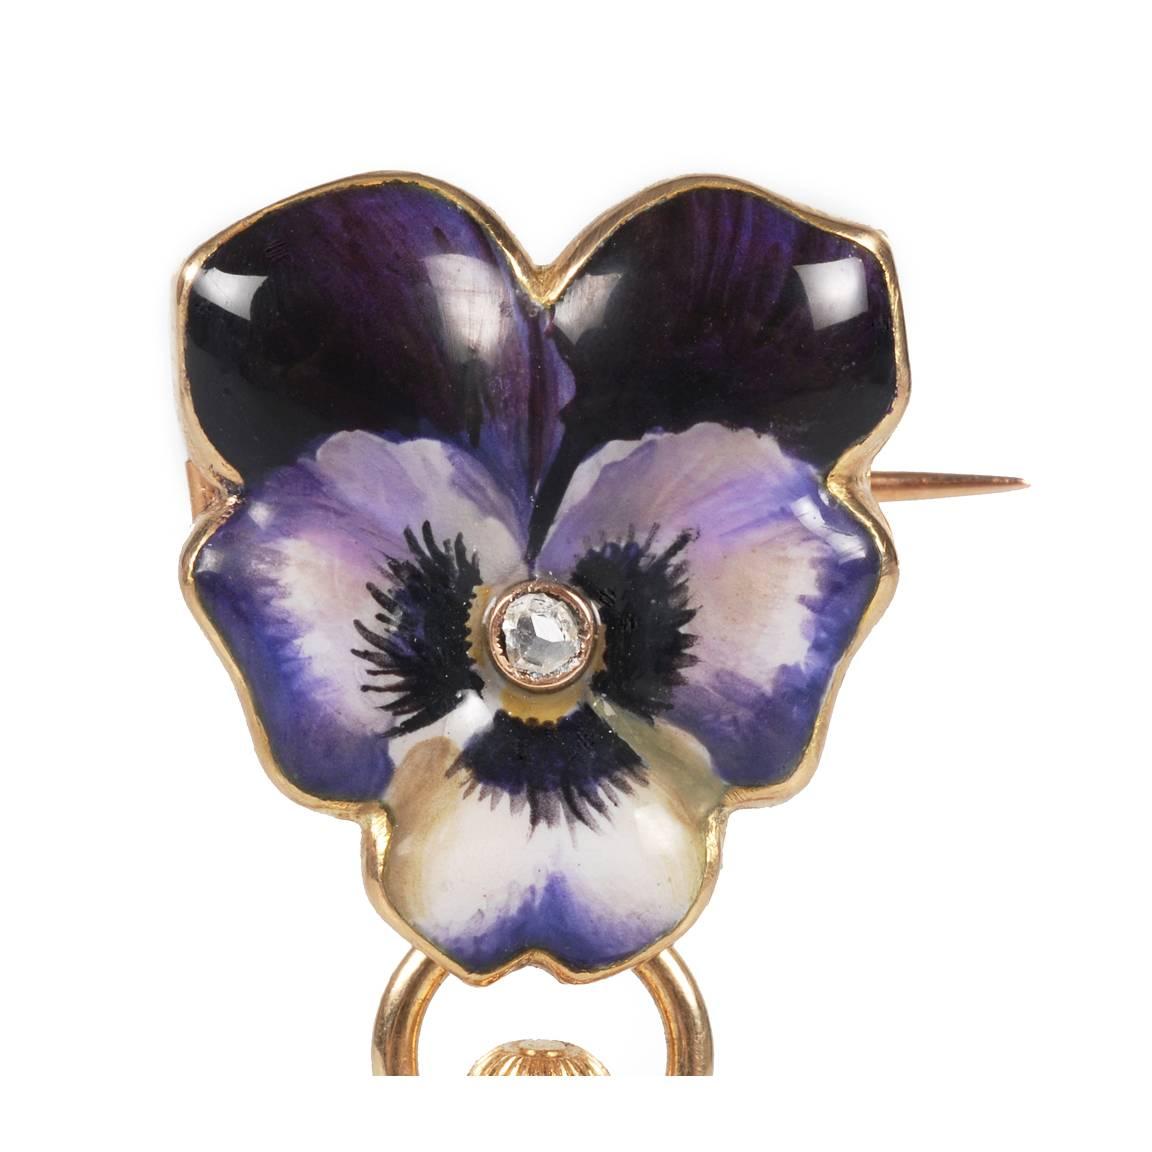 An antique Fabergé diamond-set gold Swiss pendant lovers' remembrance watch painted in pictorial enamels (or en plein) as deep purple wild pansy (viola tricolor, or heart's ease) blooms, B. Altenburger, retailed by Fabergé, circa 1895. The brooch